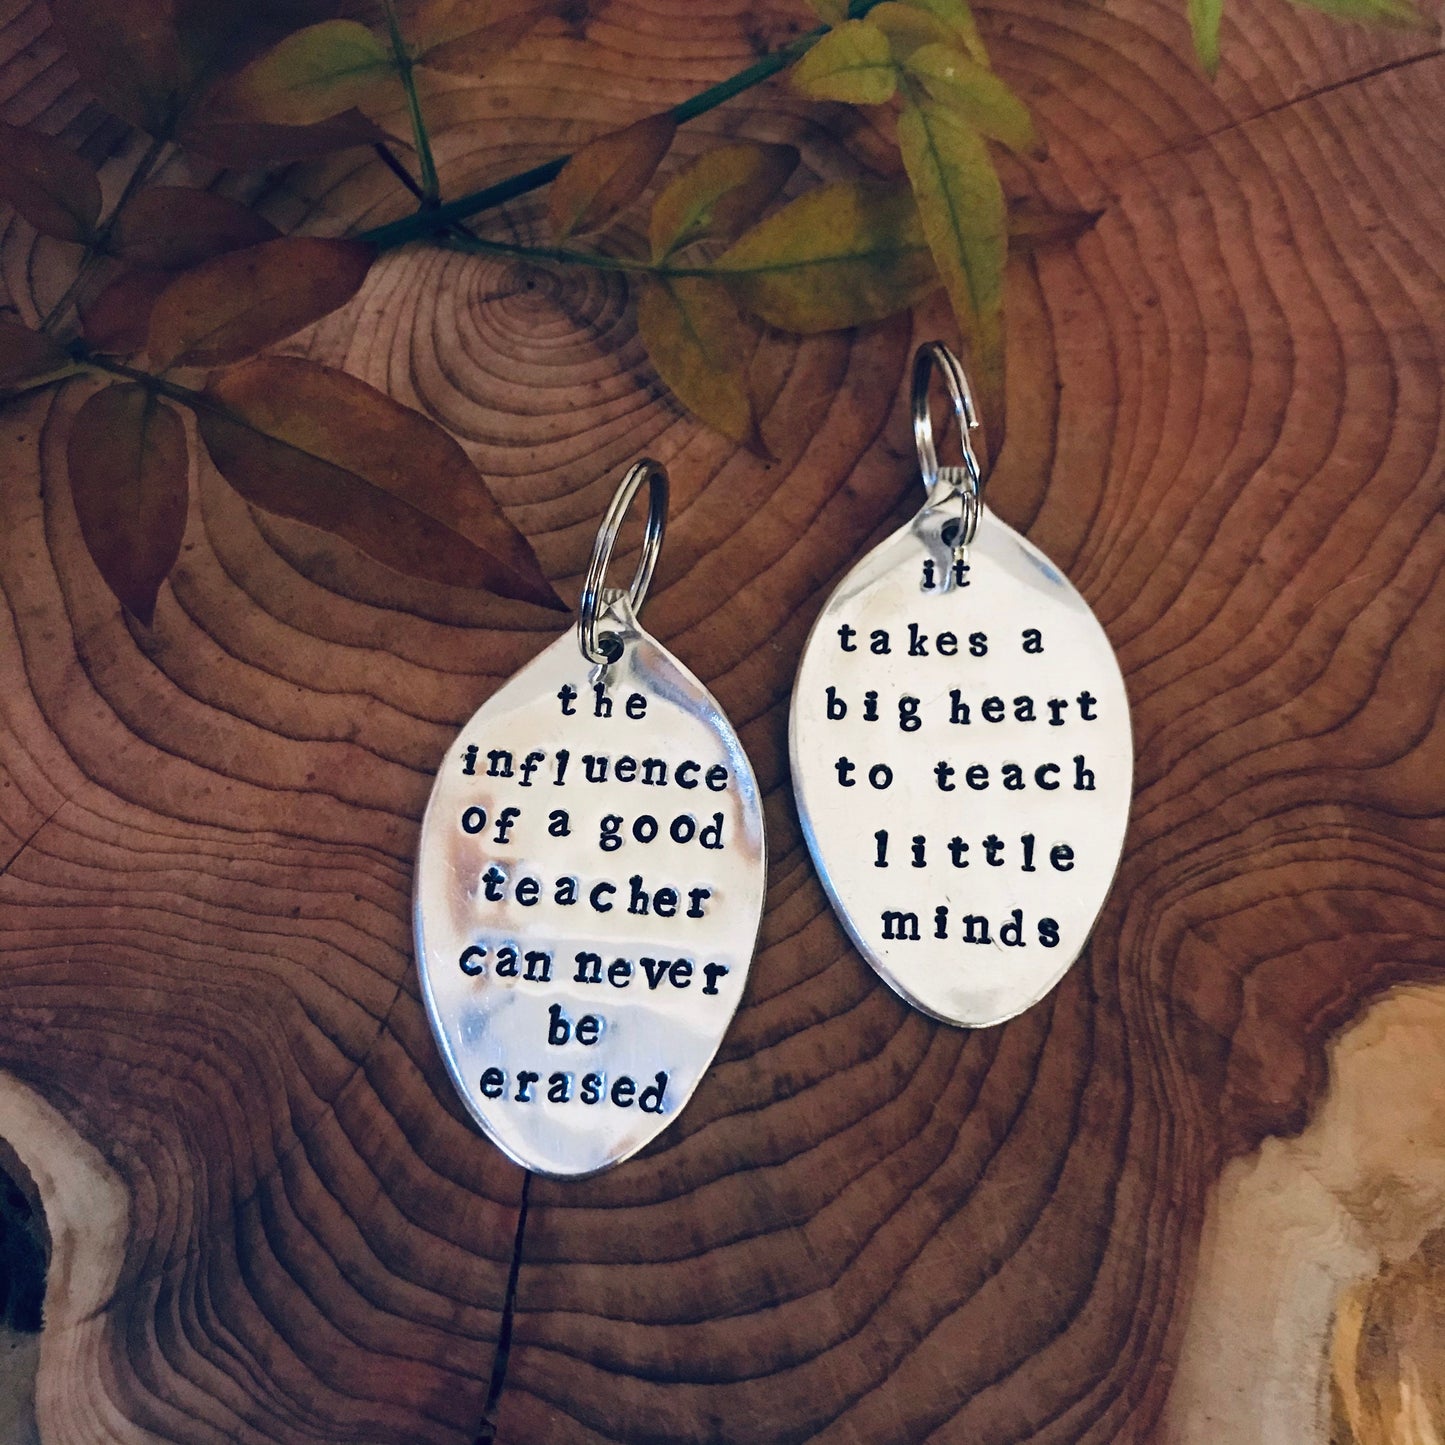 The influence of a Good Teacher Can Never Be Erased - Vintage Spoon Keyring